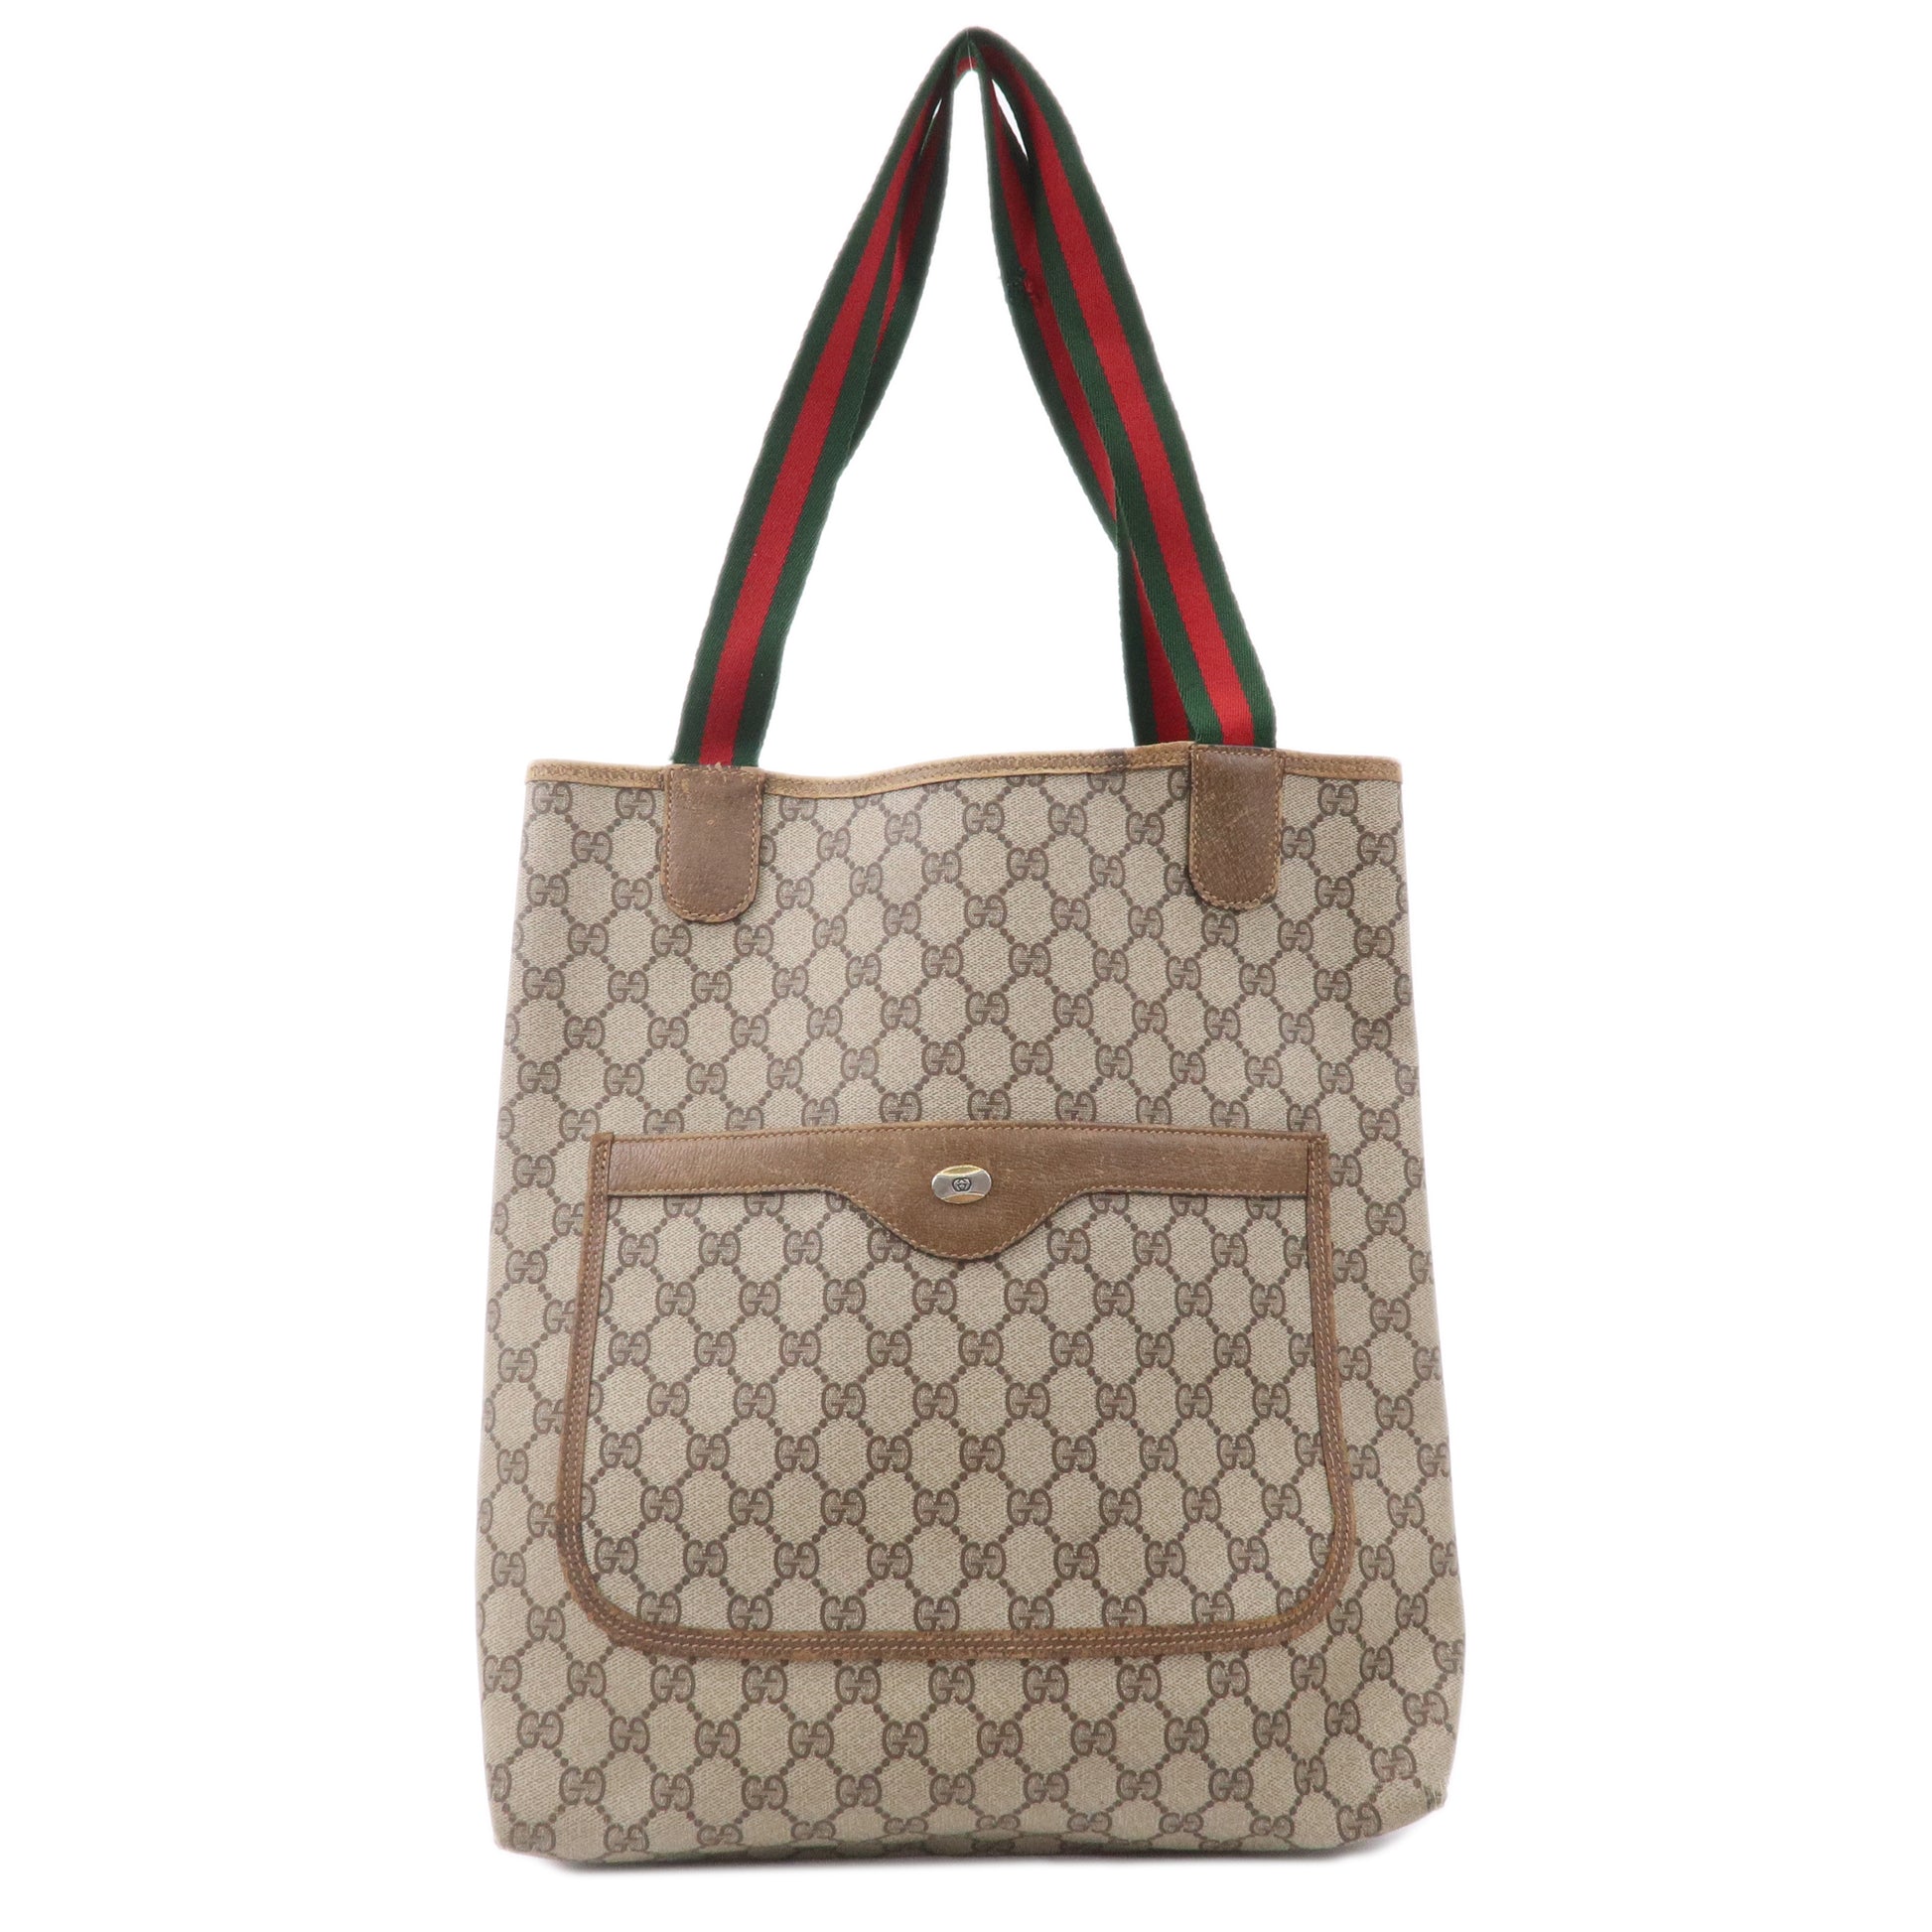 Gucci Vintage Brown Monogram Shopping Bag Tote with Stripes at